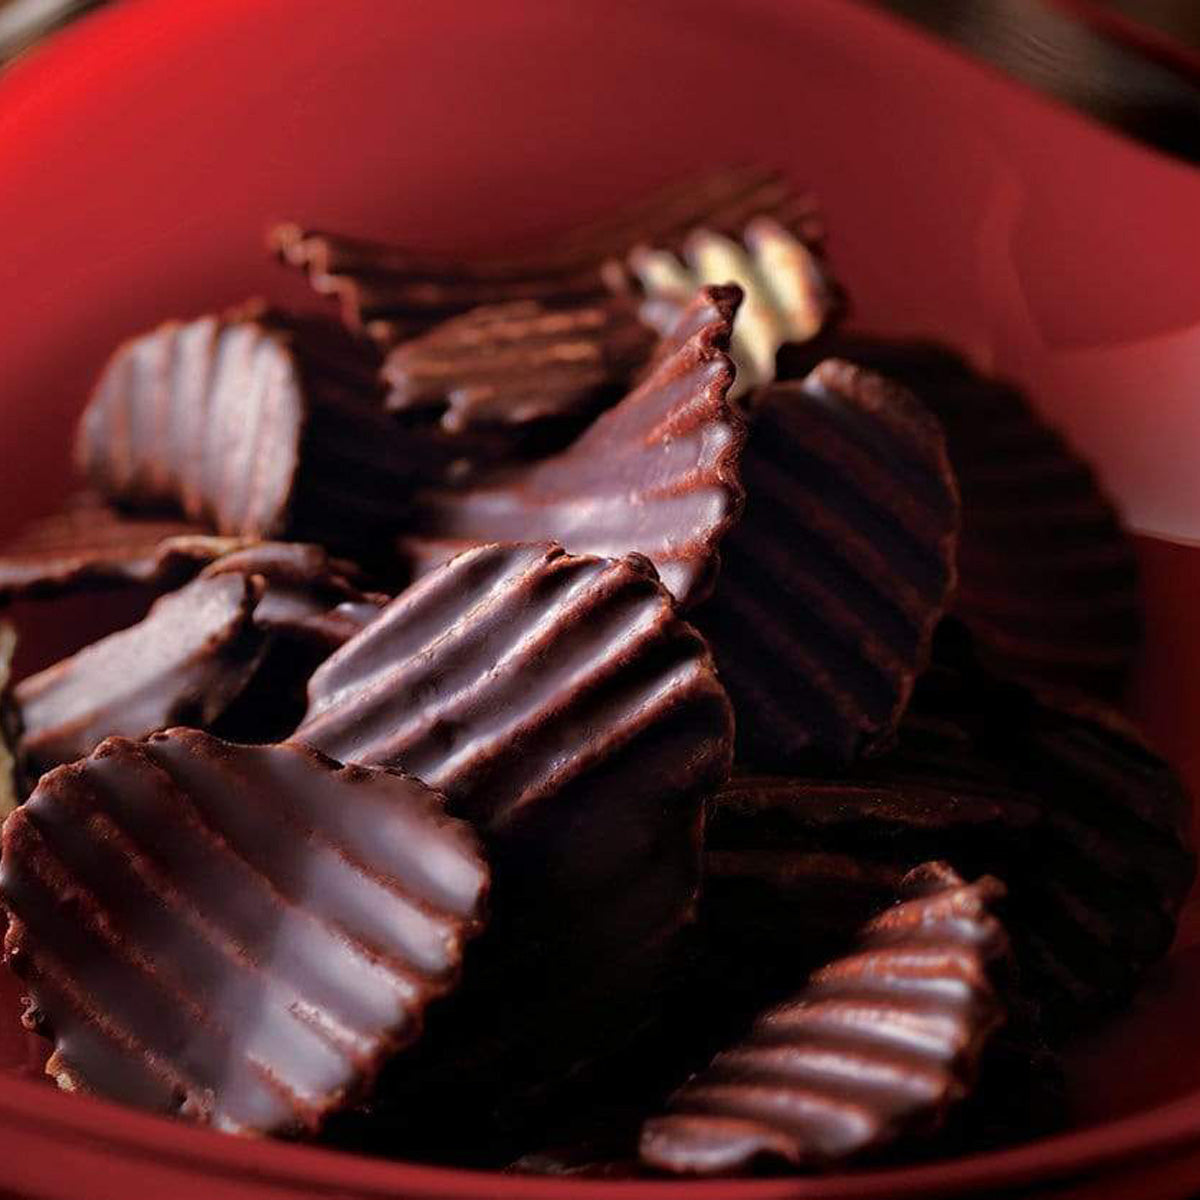 ROYCE' Chocolate - Potatochip Chocolate "Mild Bitter" - Image shows dark brown chocolate-covered potato chips with a ridged texture, as seen in a red plate. Background is in red color.